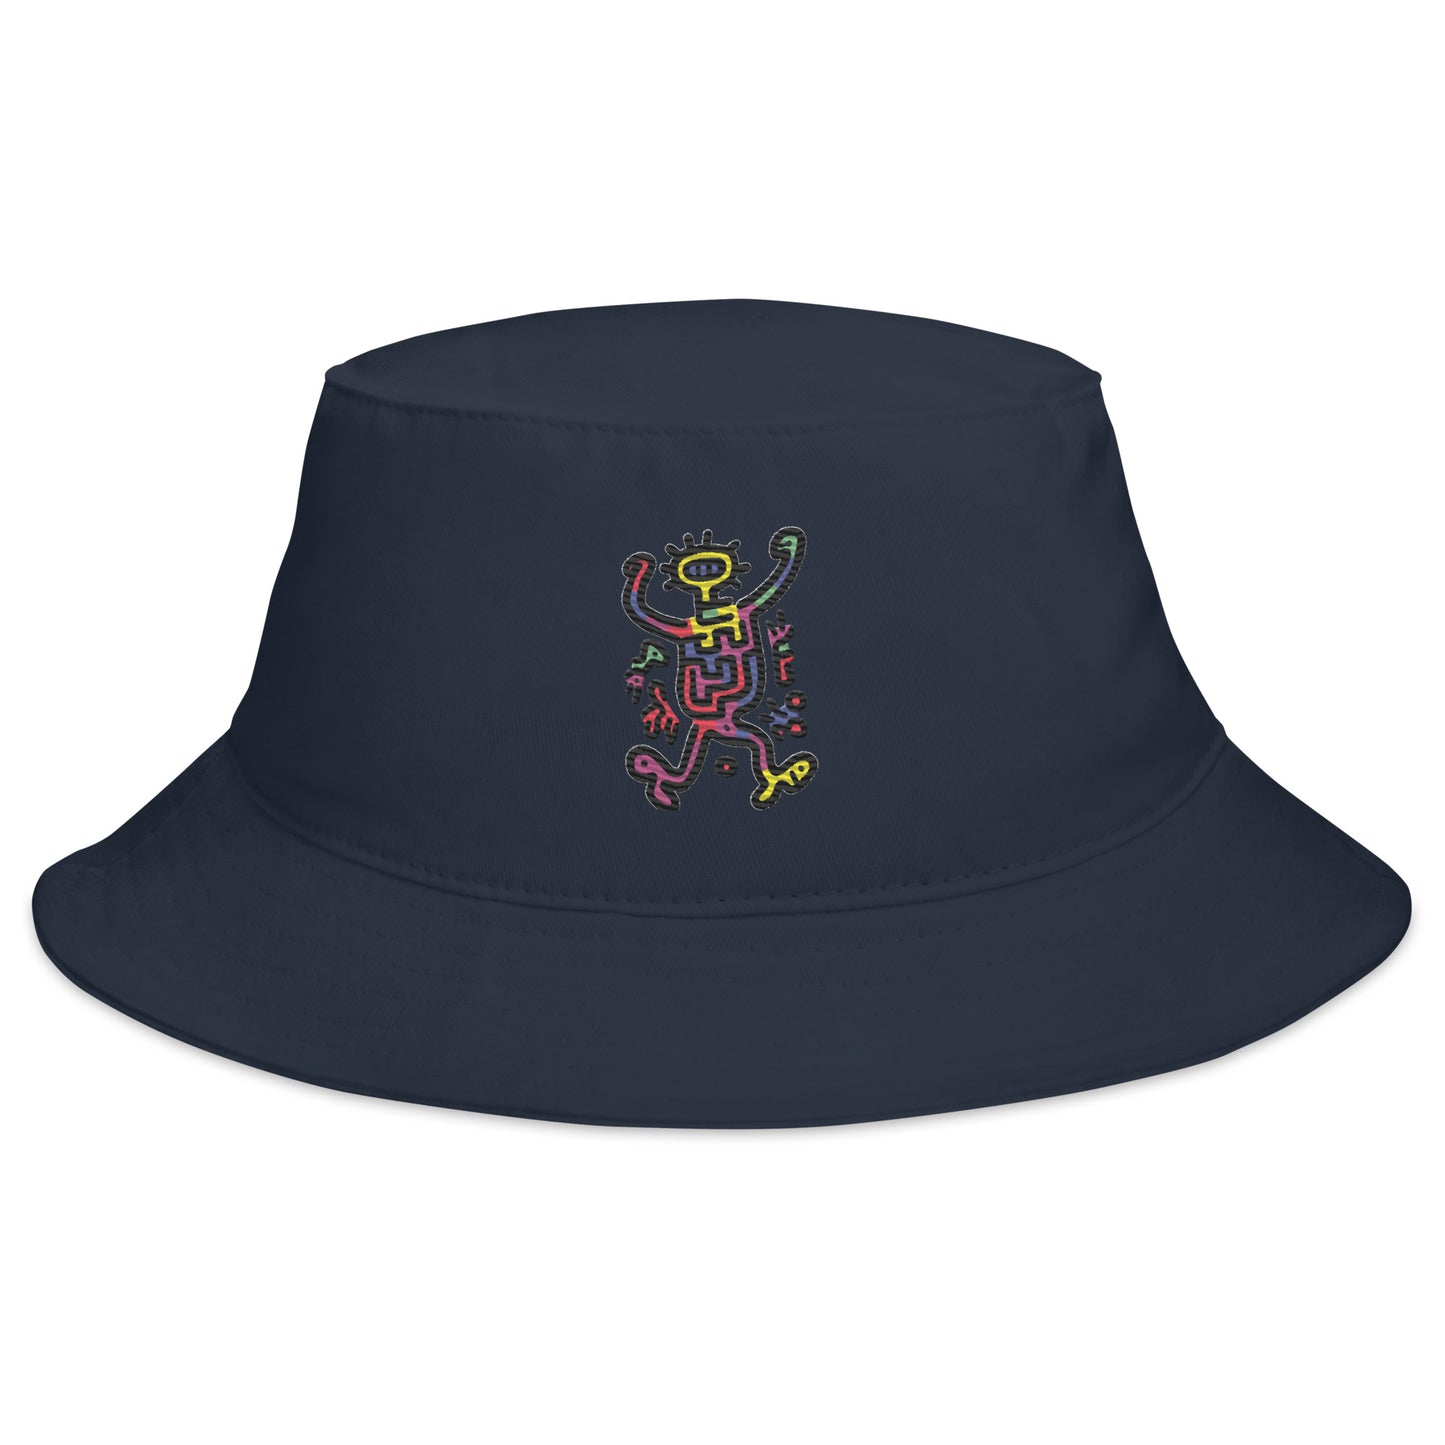 Doodles Me "Most Wanted" Bucket Hat #6